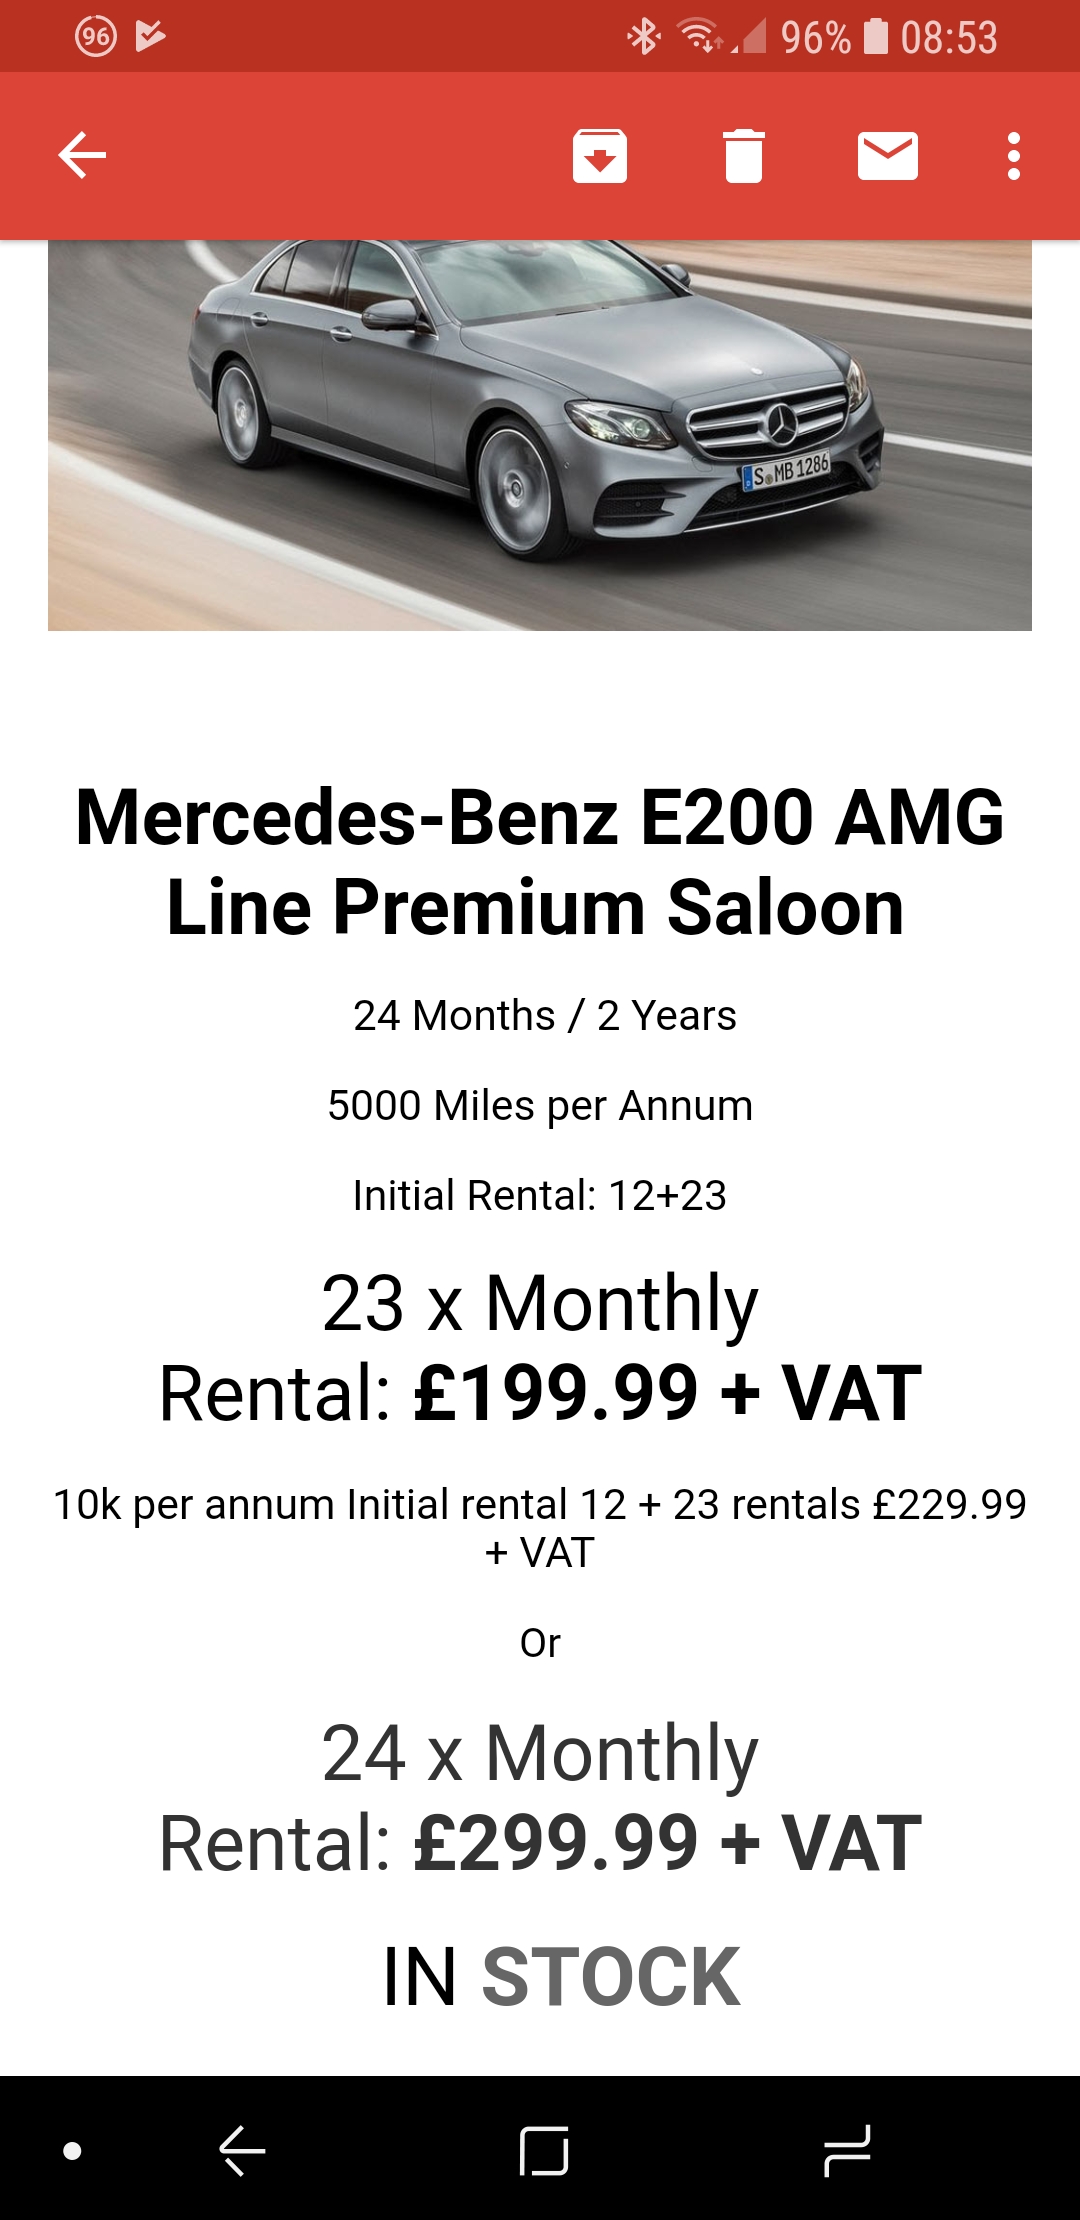 Best Lease Car Deals Available? (Vol 6) - Page 256 - Car Buying - PistonHeads